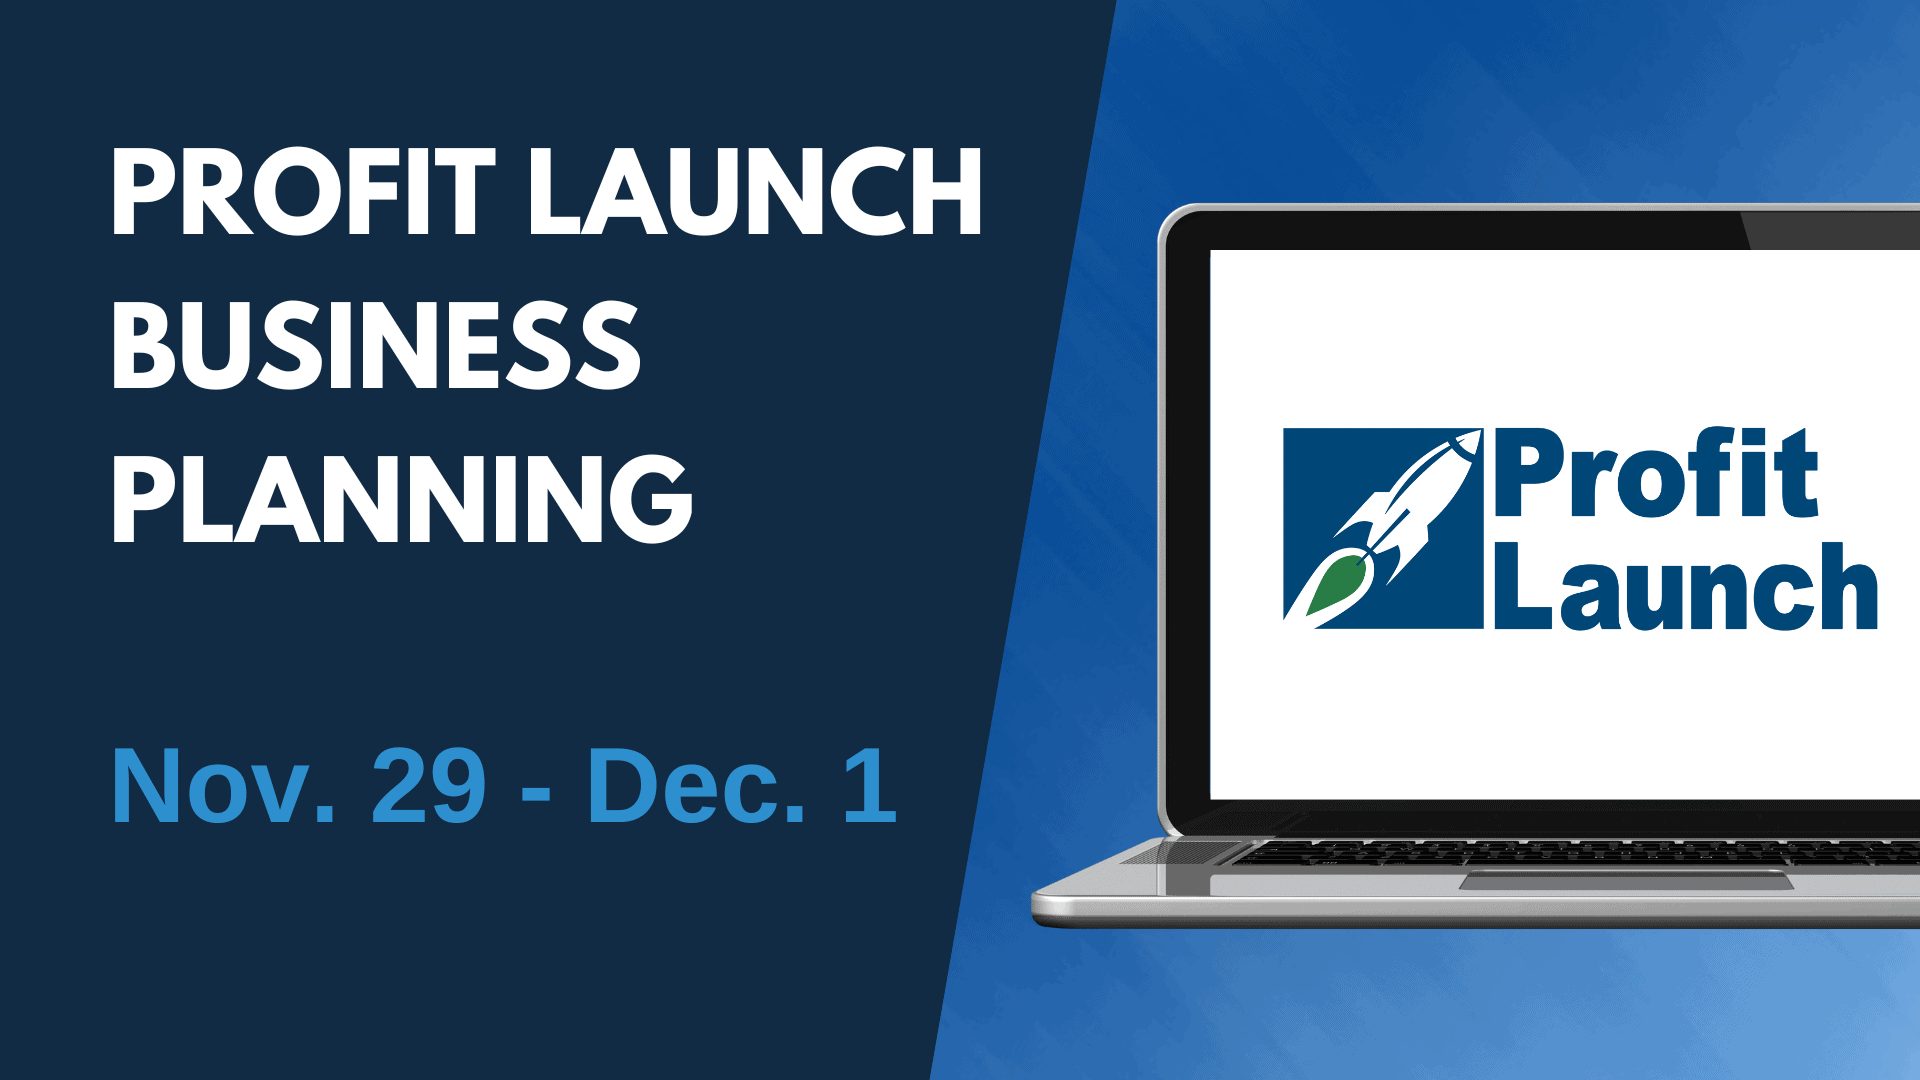 Profit Launch Business Planning - November 29 to December 1